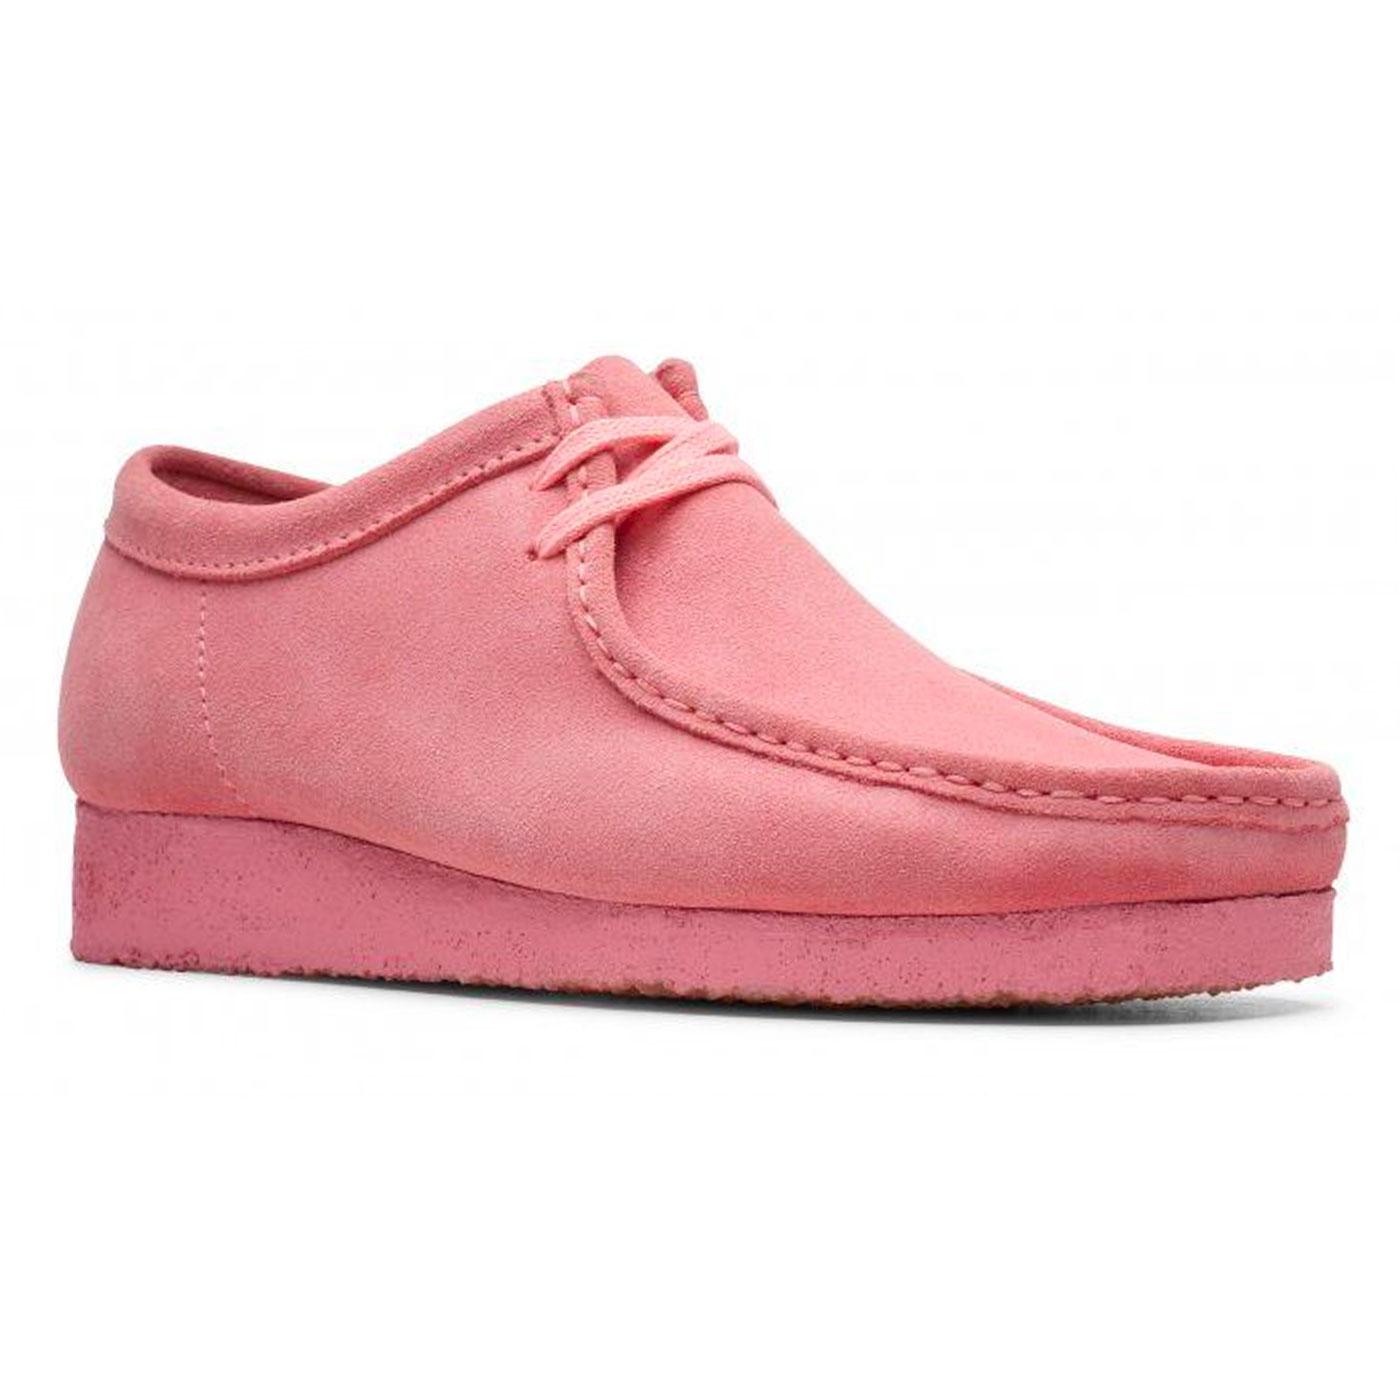 clarks wallabees womens on sale